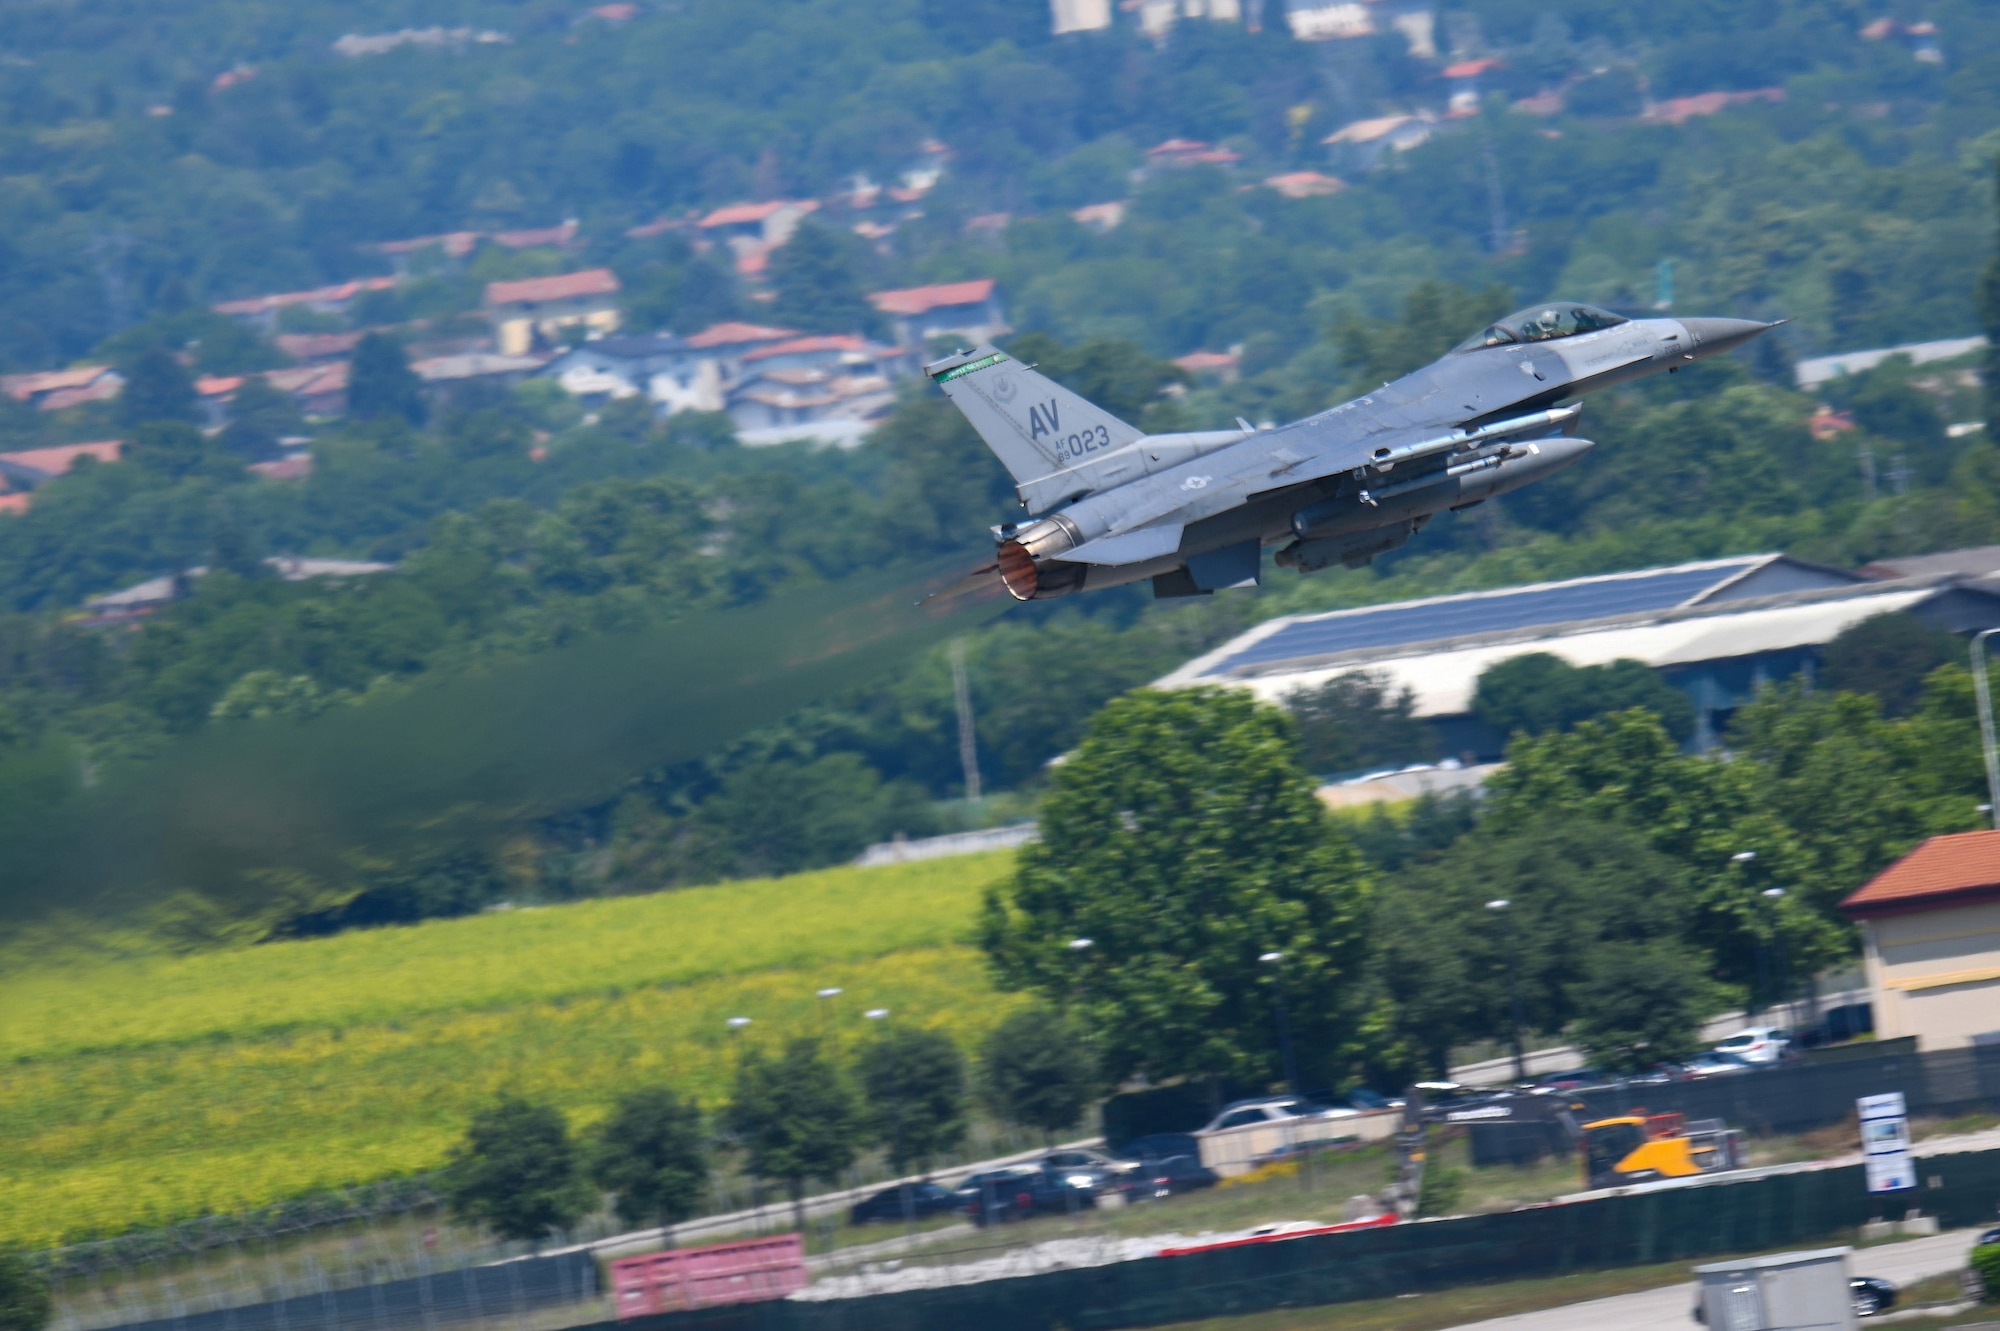 A U.S. Air Force F-16 Fighting Falcon from the 555th Fighter Squadron takes flight during an Elephant Walk and COVID-19 flyover at Aviano Air Base, Italy, June 1, 2020. The Elephant Walk was intended to showcase the continued combat power of Aviano AB and give thanks to first responders, doctors, and all personnel engaged in the battle against COVID-19. (U.S. Air Force photo by Airman 1st Class Ericka A. Woolever).